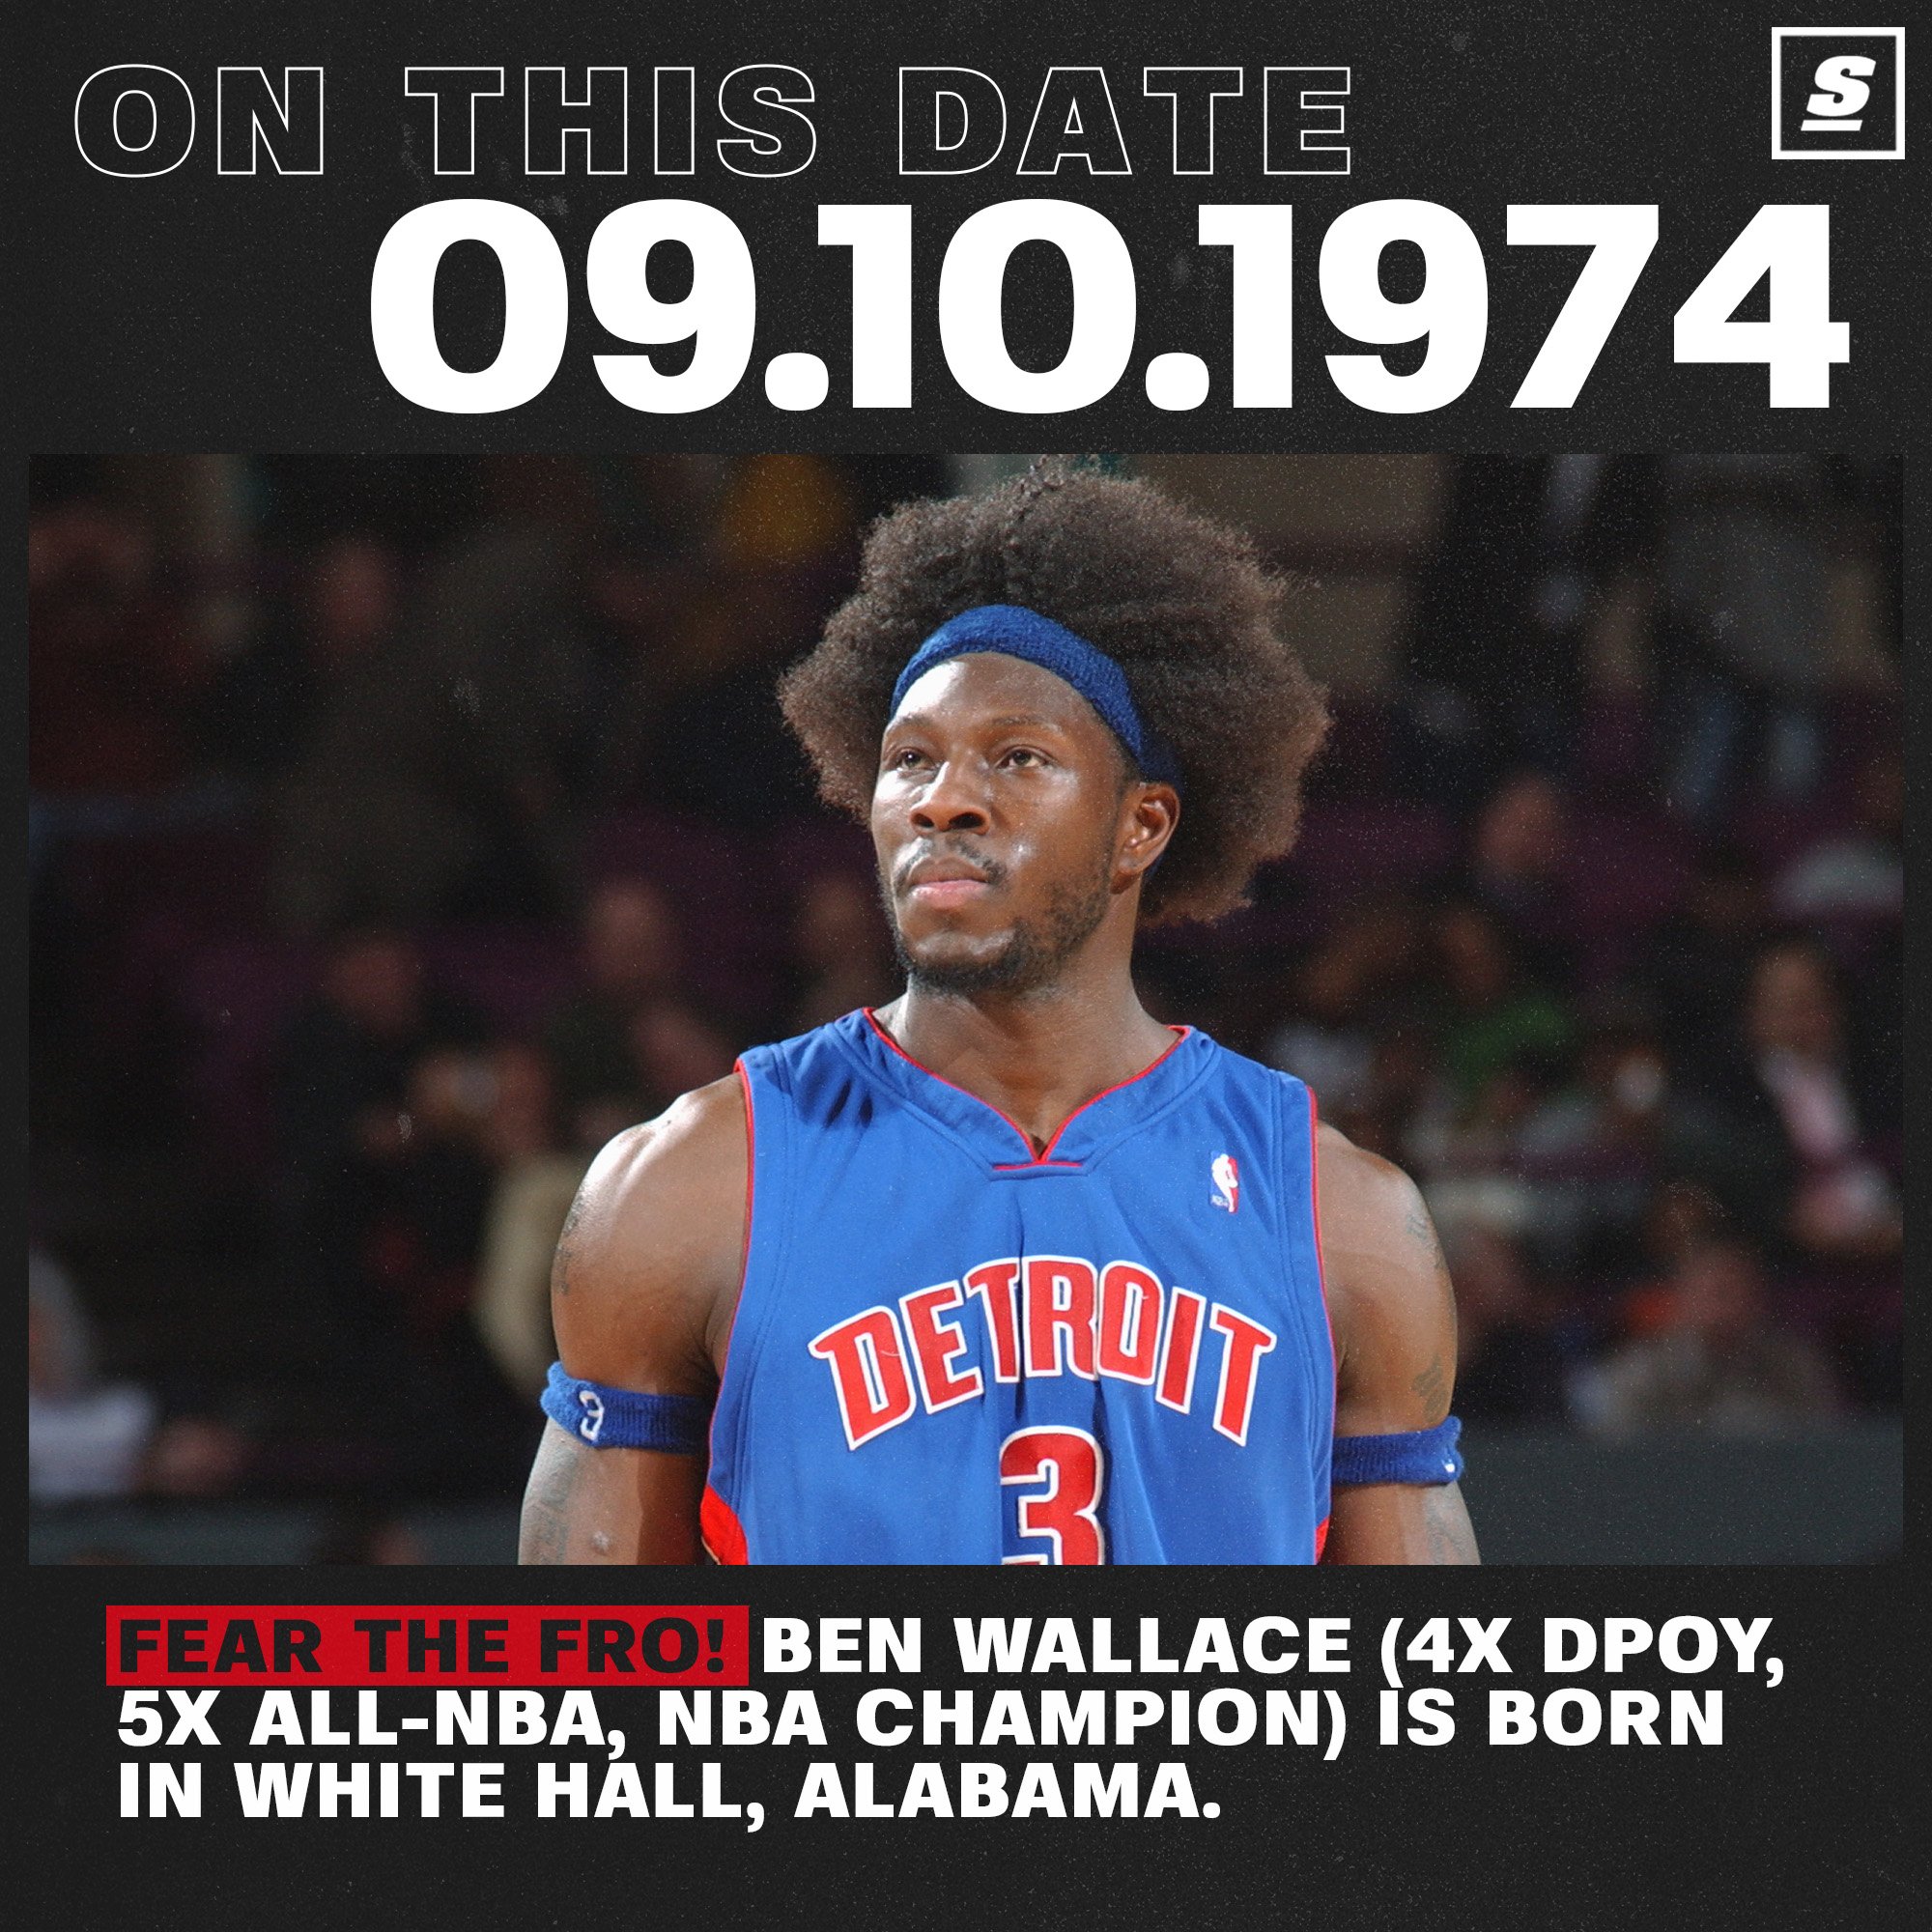 From undrafted to one of the greatest defensive players of all time. Happy birthday Ben Wallace!   